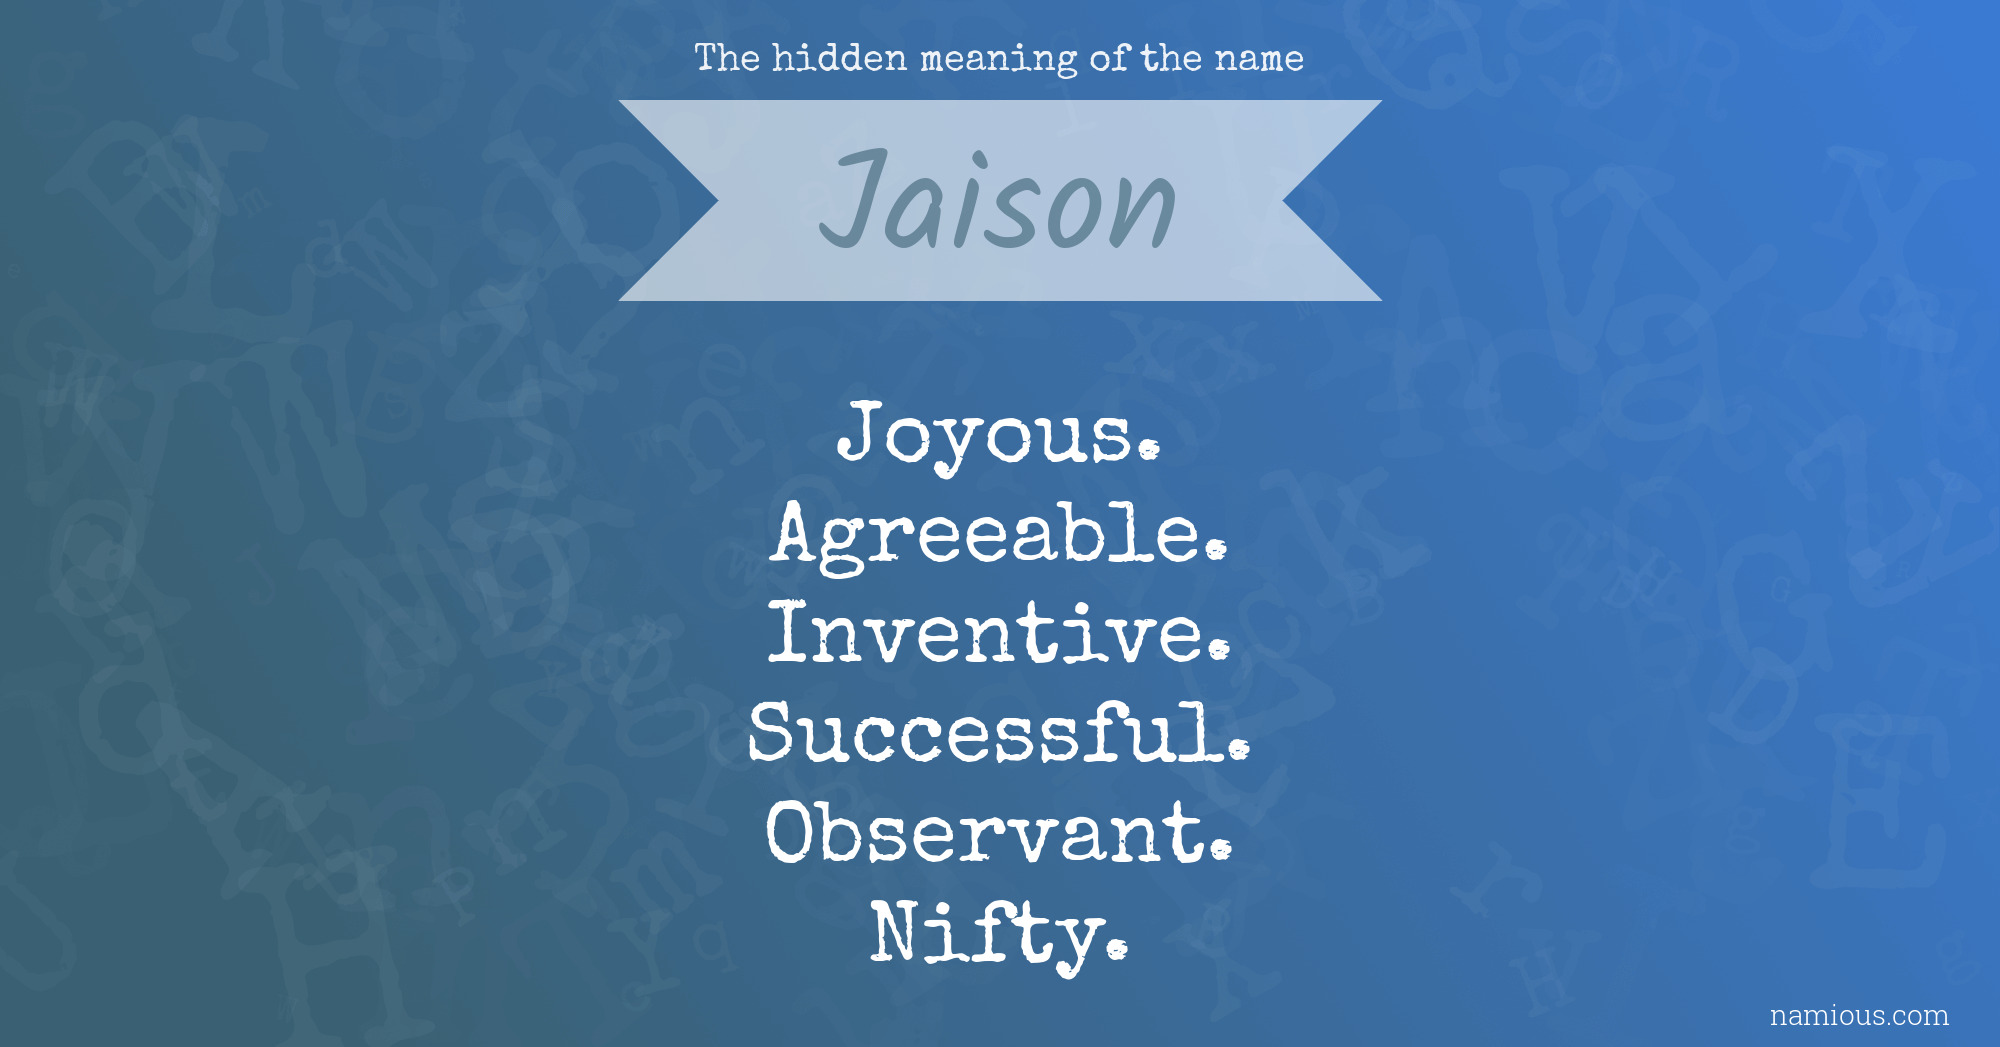 The hidden meaning of the name Jaison